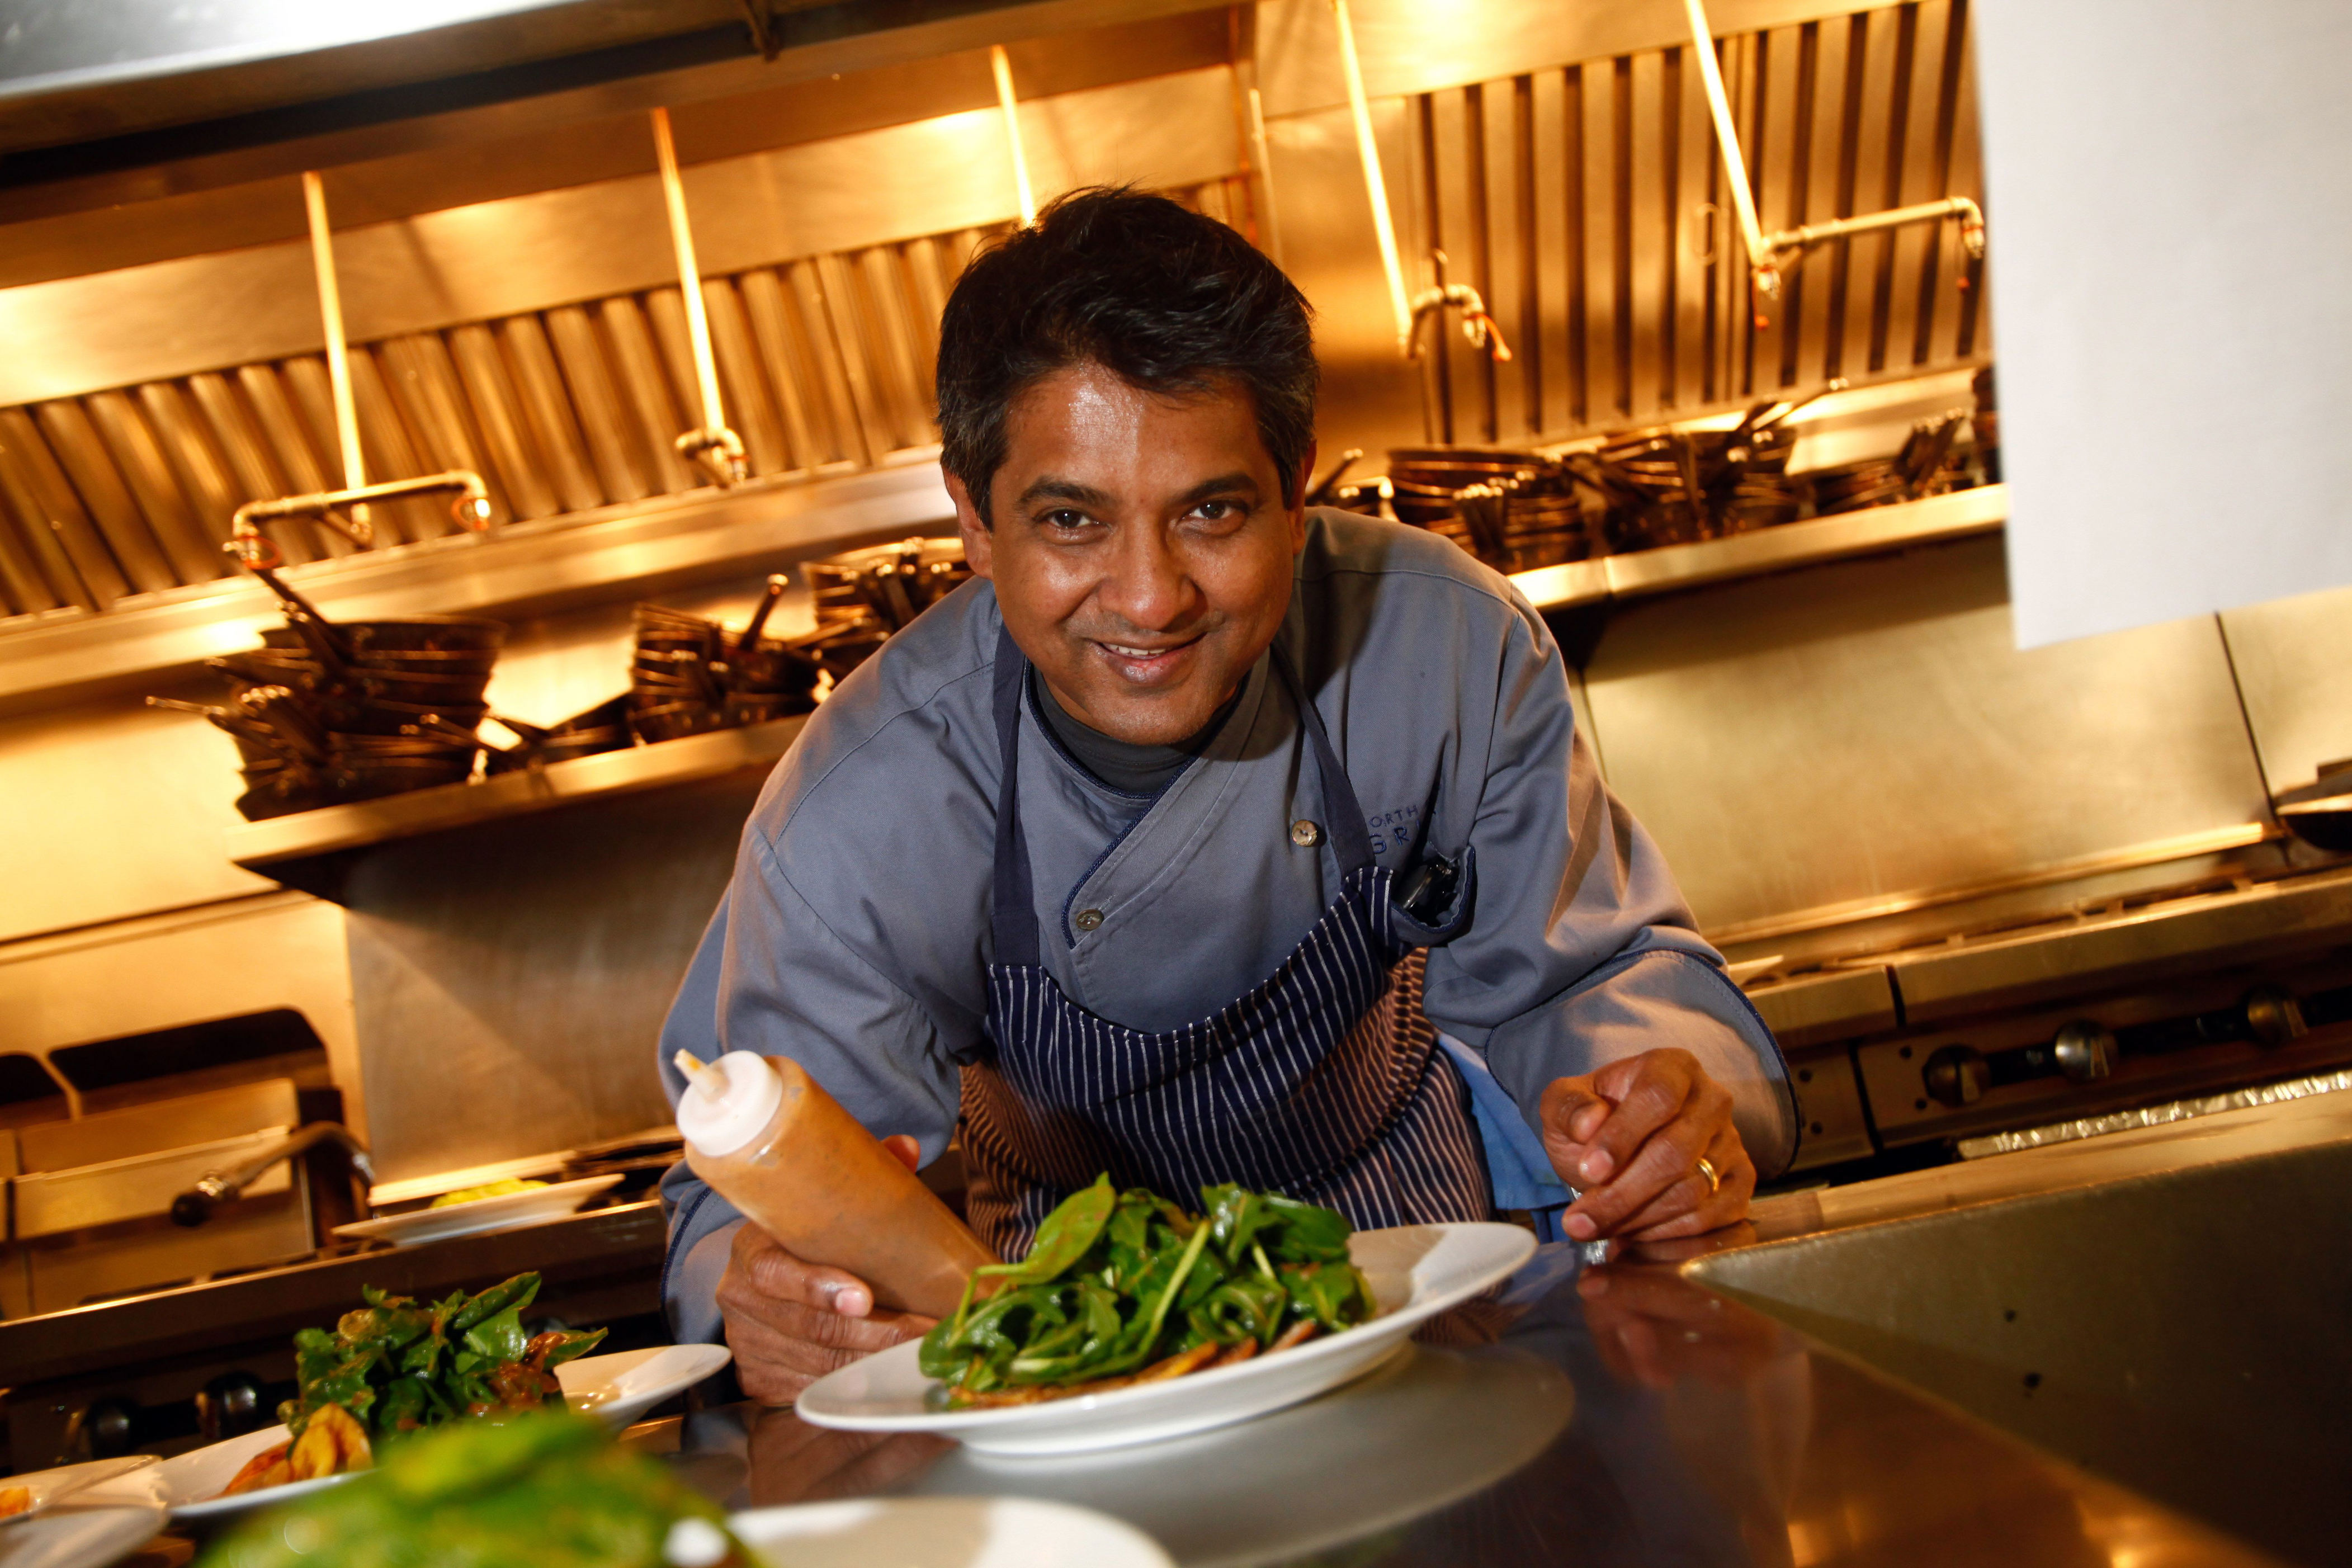 <p>"Top Chef Masters" winner Floyd Cardoz died on March 25 due to complications from the novel coronavirus. The 59-year-old celebrity chef, who cooked on dozens of TV shows, was admitted to a New Jersey hospital after he fell ill upon returning from a trip to Mumbai in March.</p>